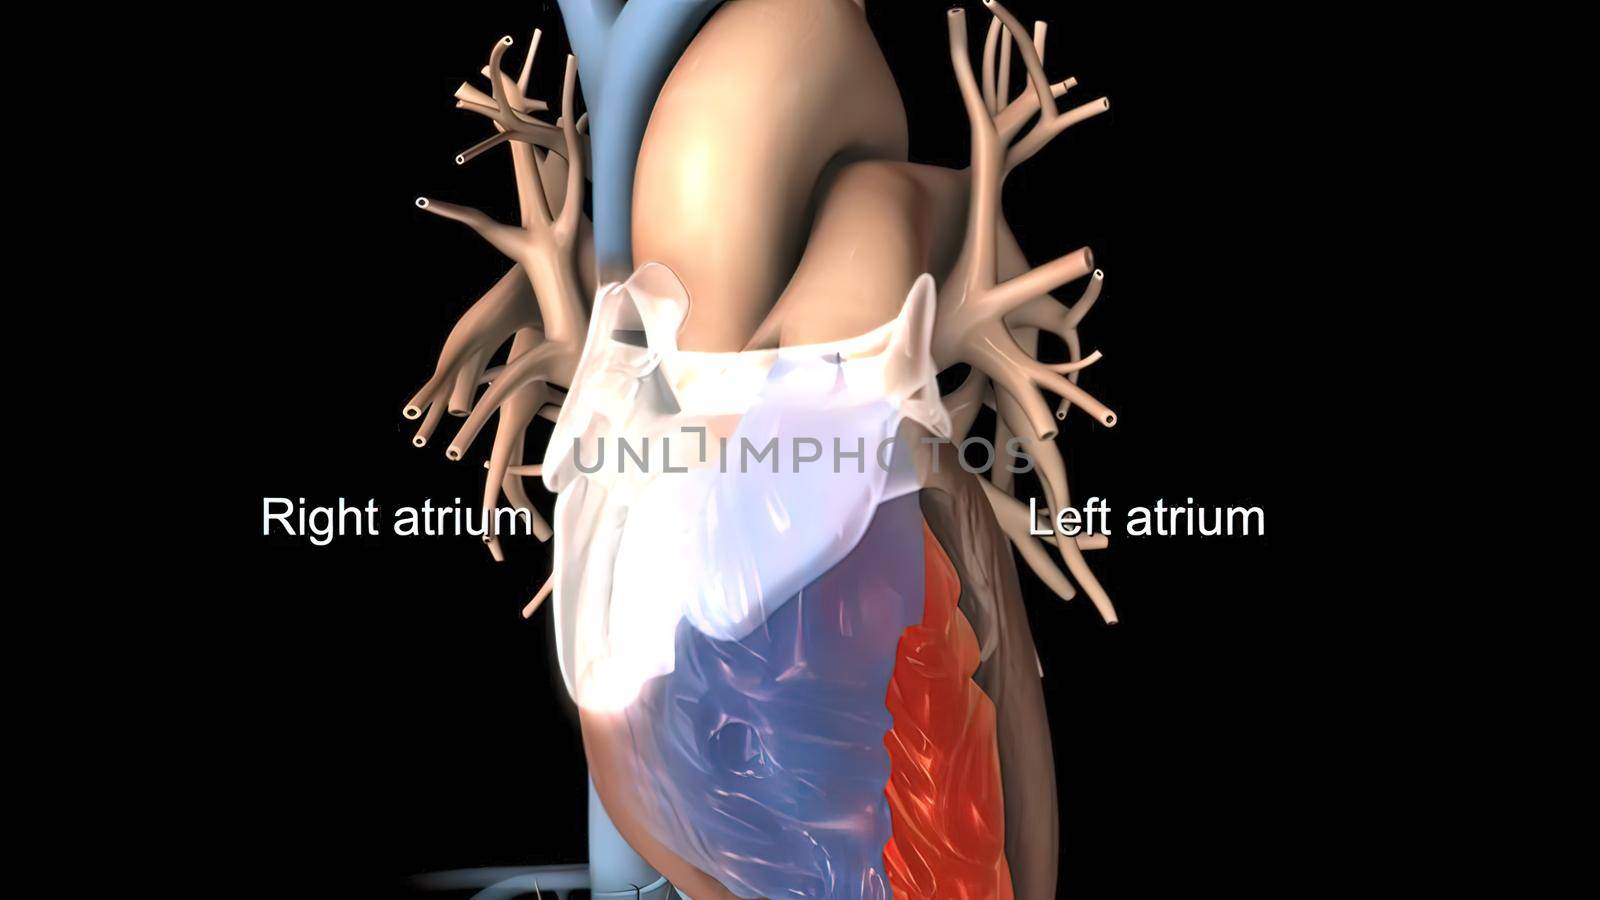 Disruption and enlargement of the heart rhythm 3D Render